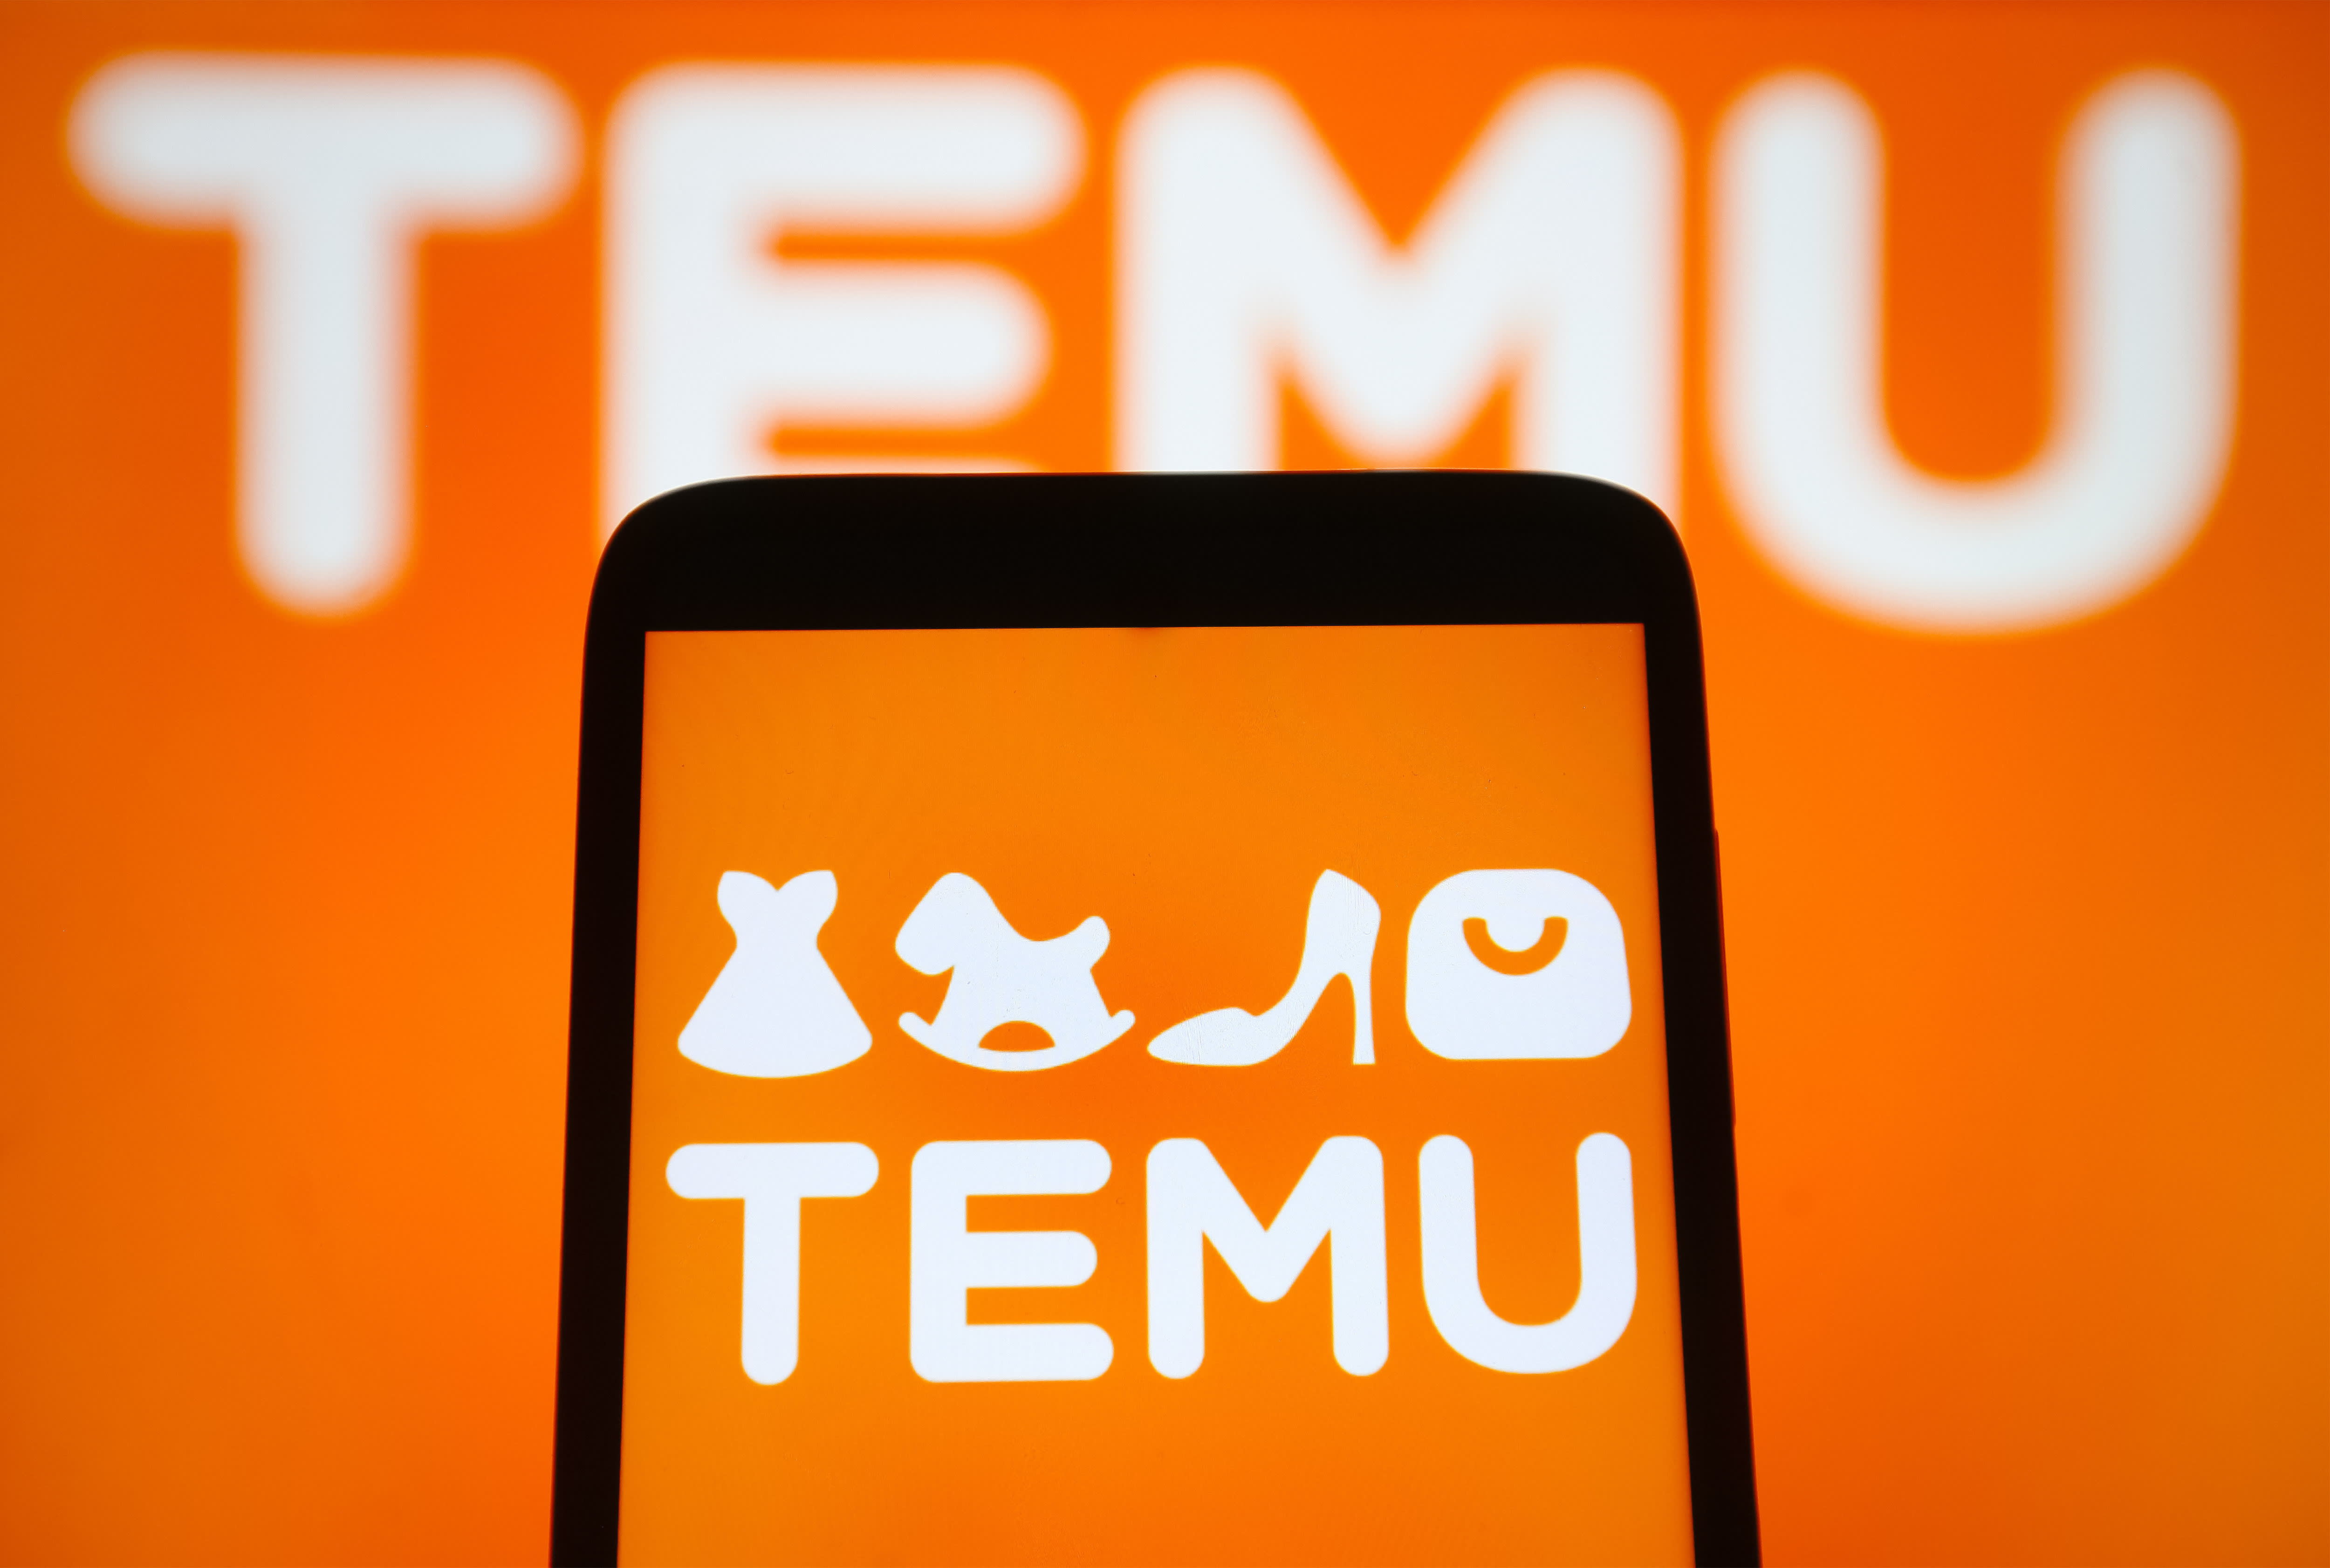 Temu: from $0 to $3 billion in 10 months